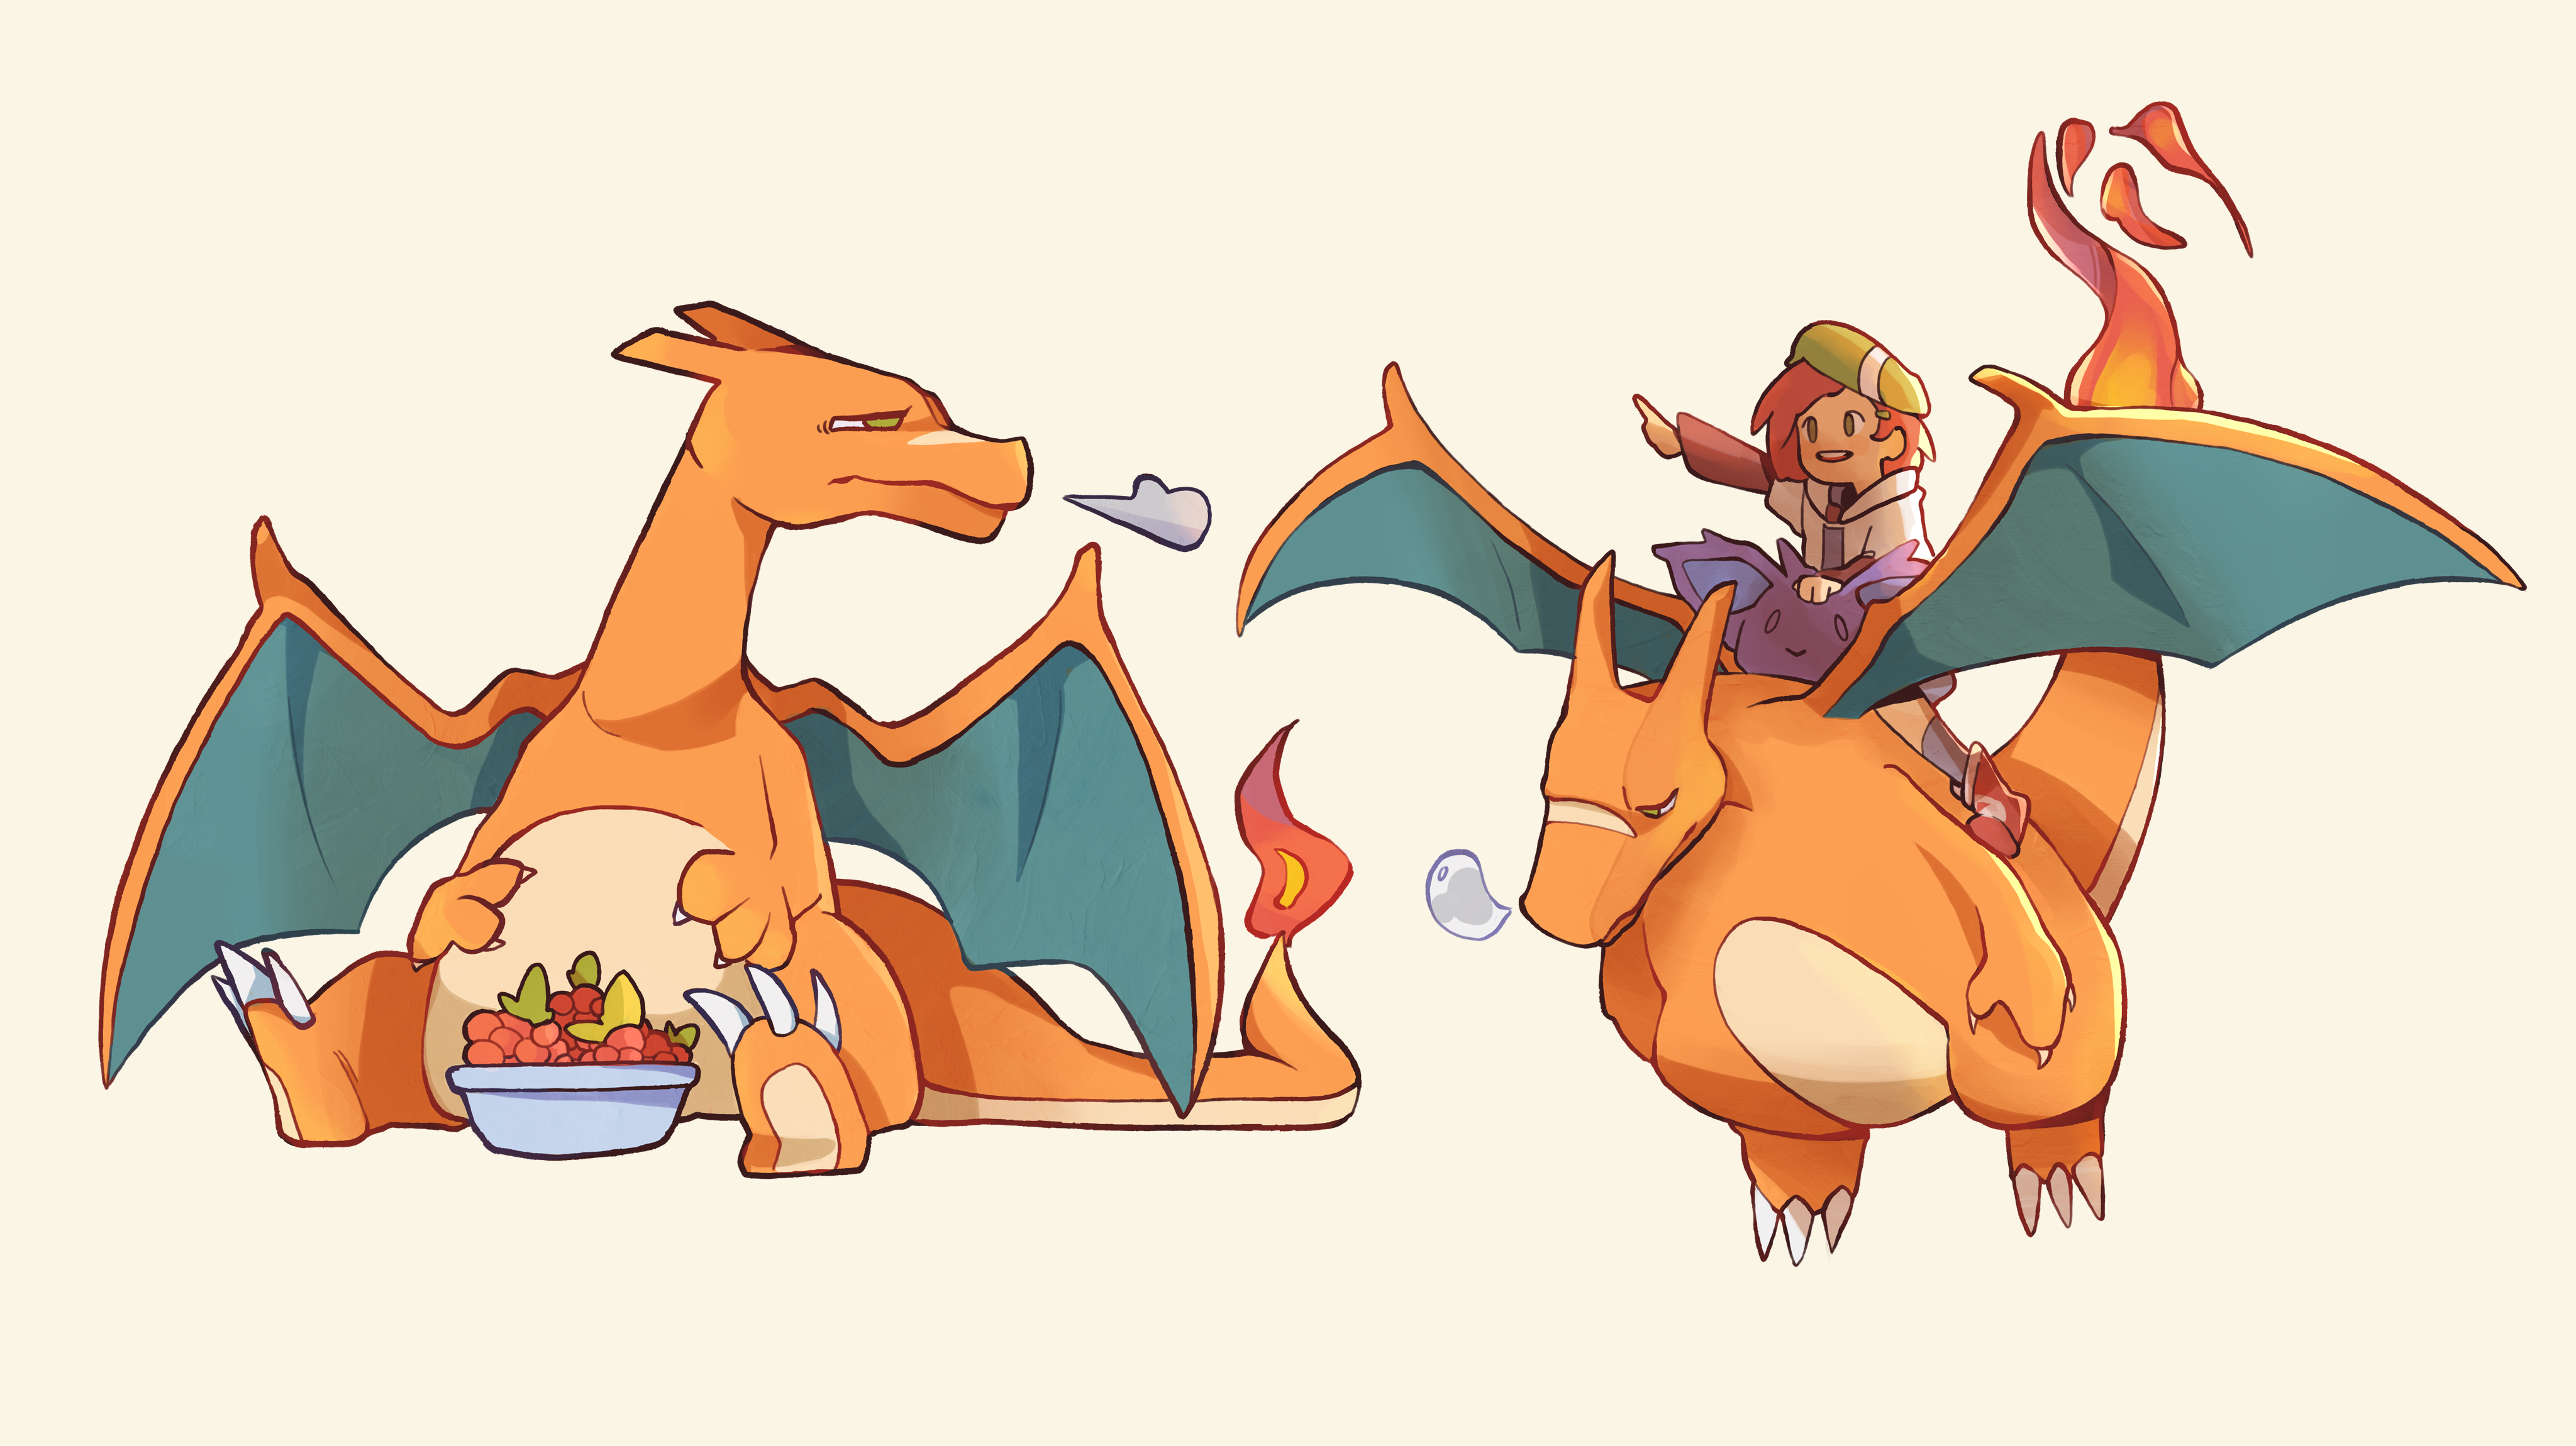 charizardtwitter2435.png